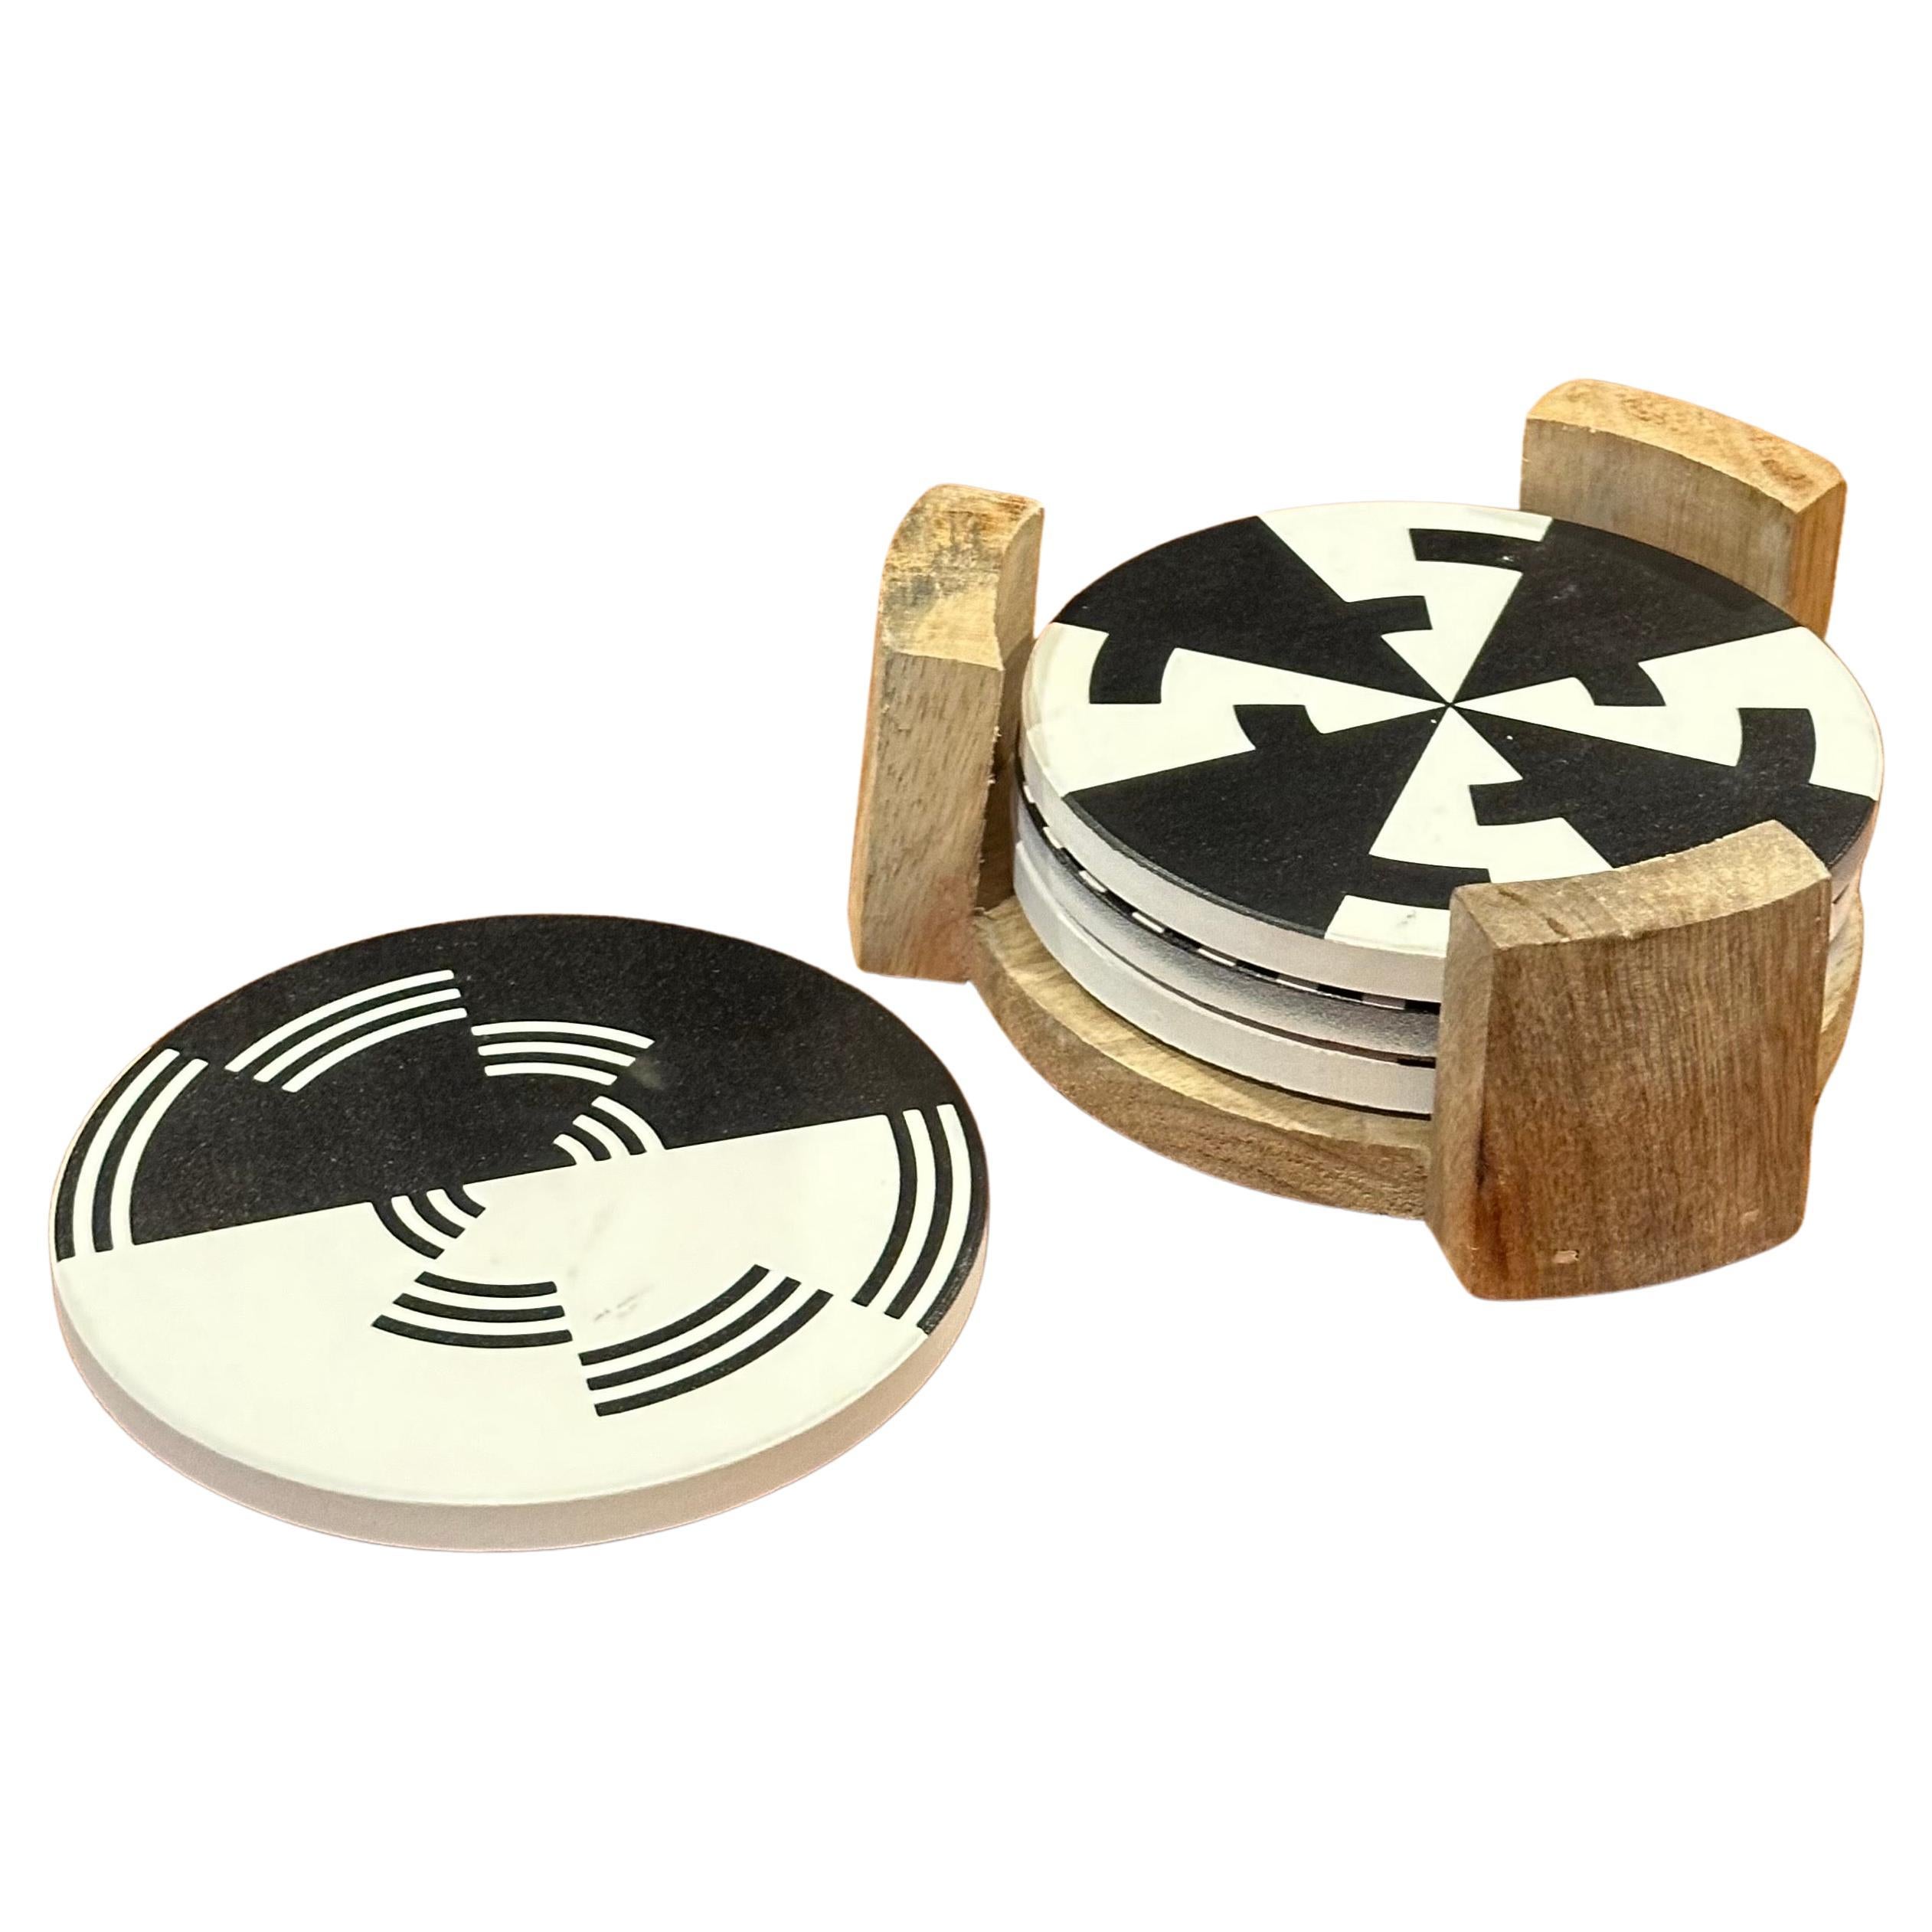 A nice set of four post-modern coasters with holder, circa 1990s. The coasters have a cork lining and are in very good vintage condition; the set measures 5